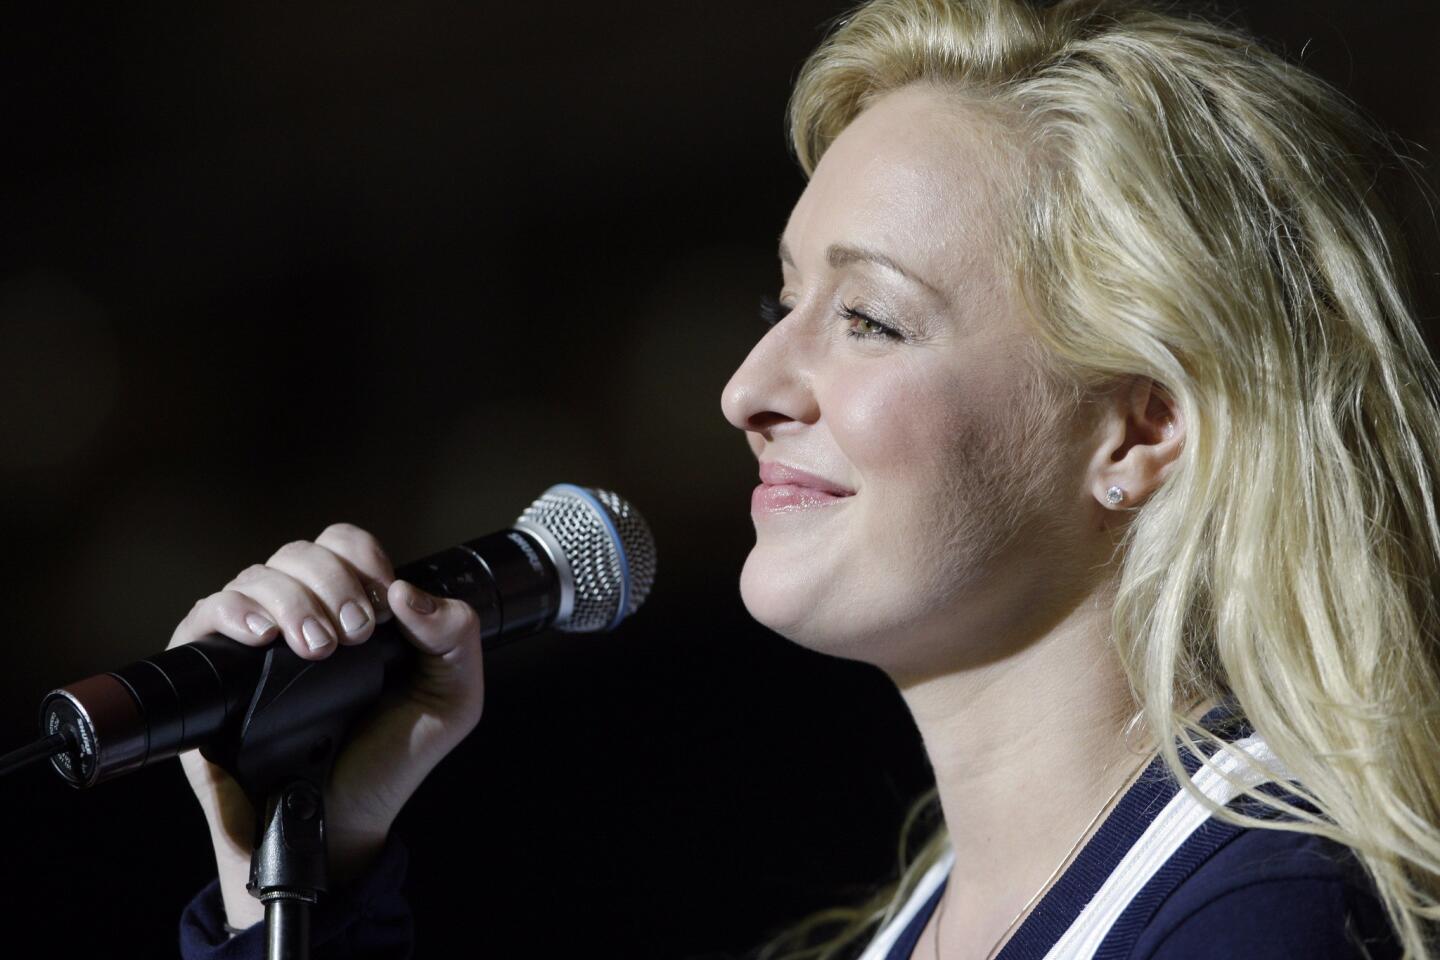 Country singer Mindy McCready performs in Nashville in this undated photo. McCready, who hit the top of the country charts before personal problems sidetracked her career, died Sunday. She was 37.